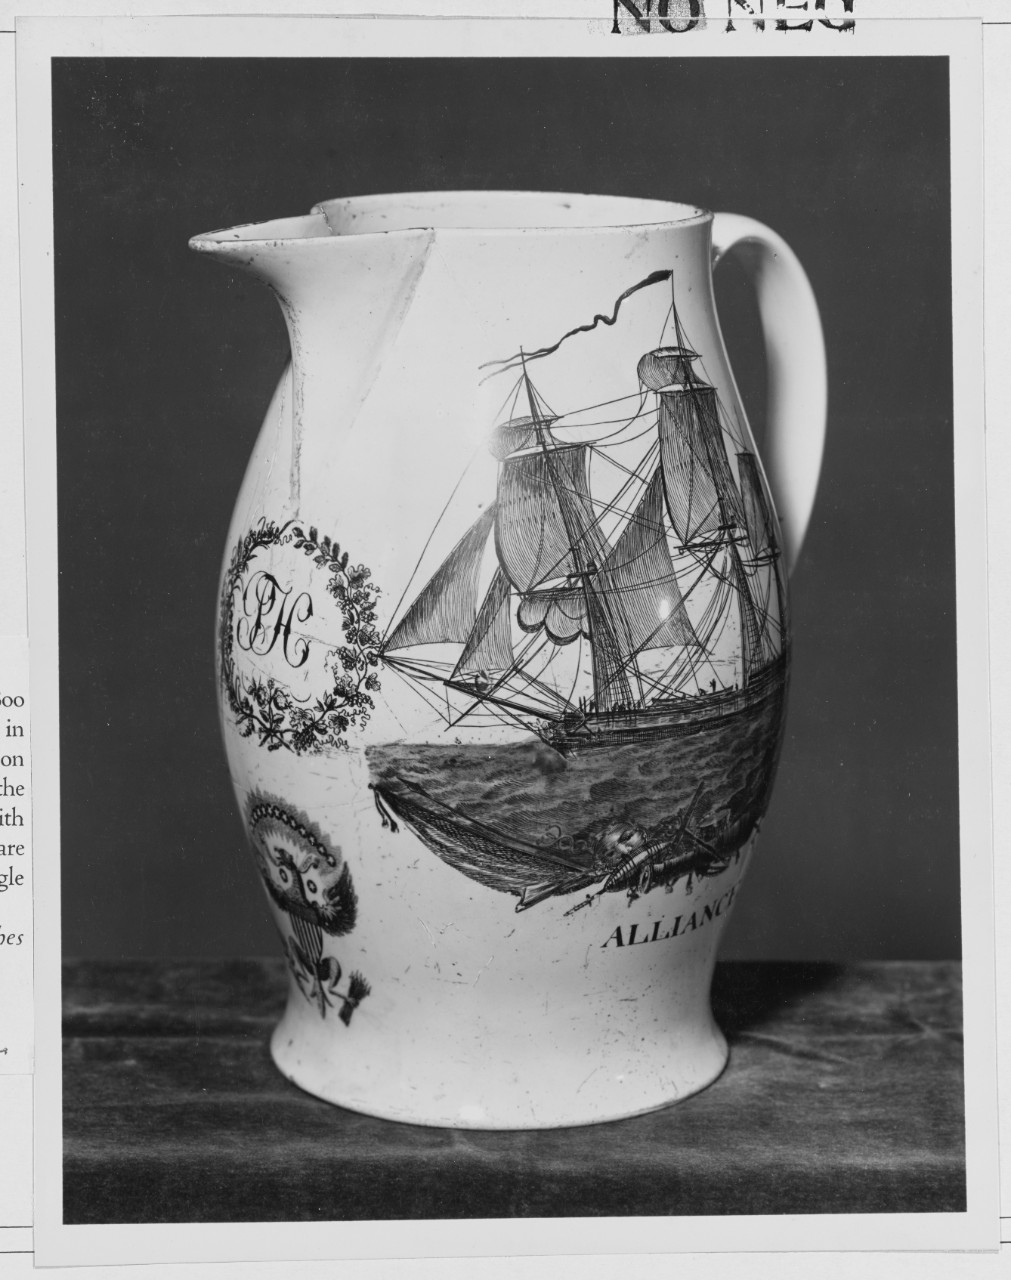 Liverpool Transfer-Decorated Pitcher, c. 1800